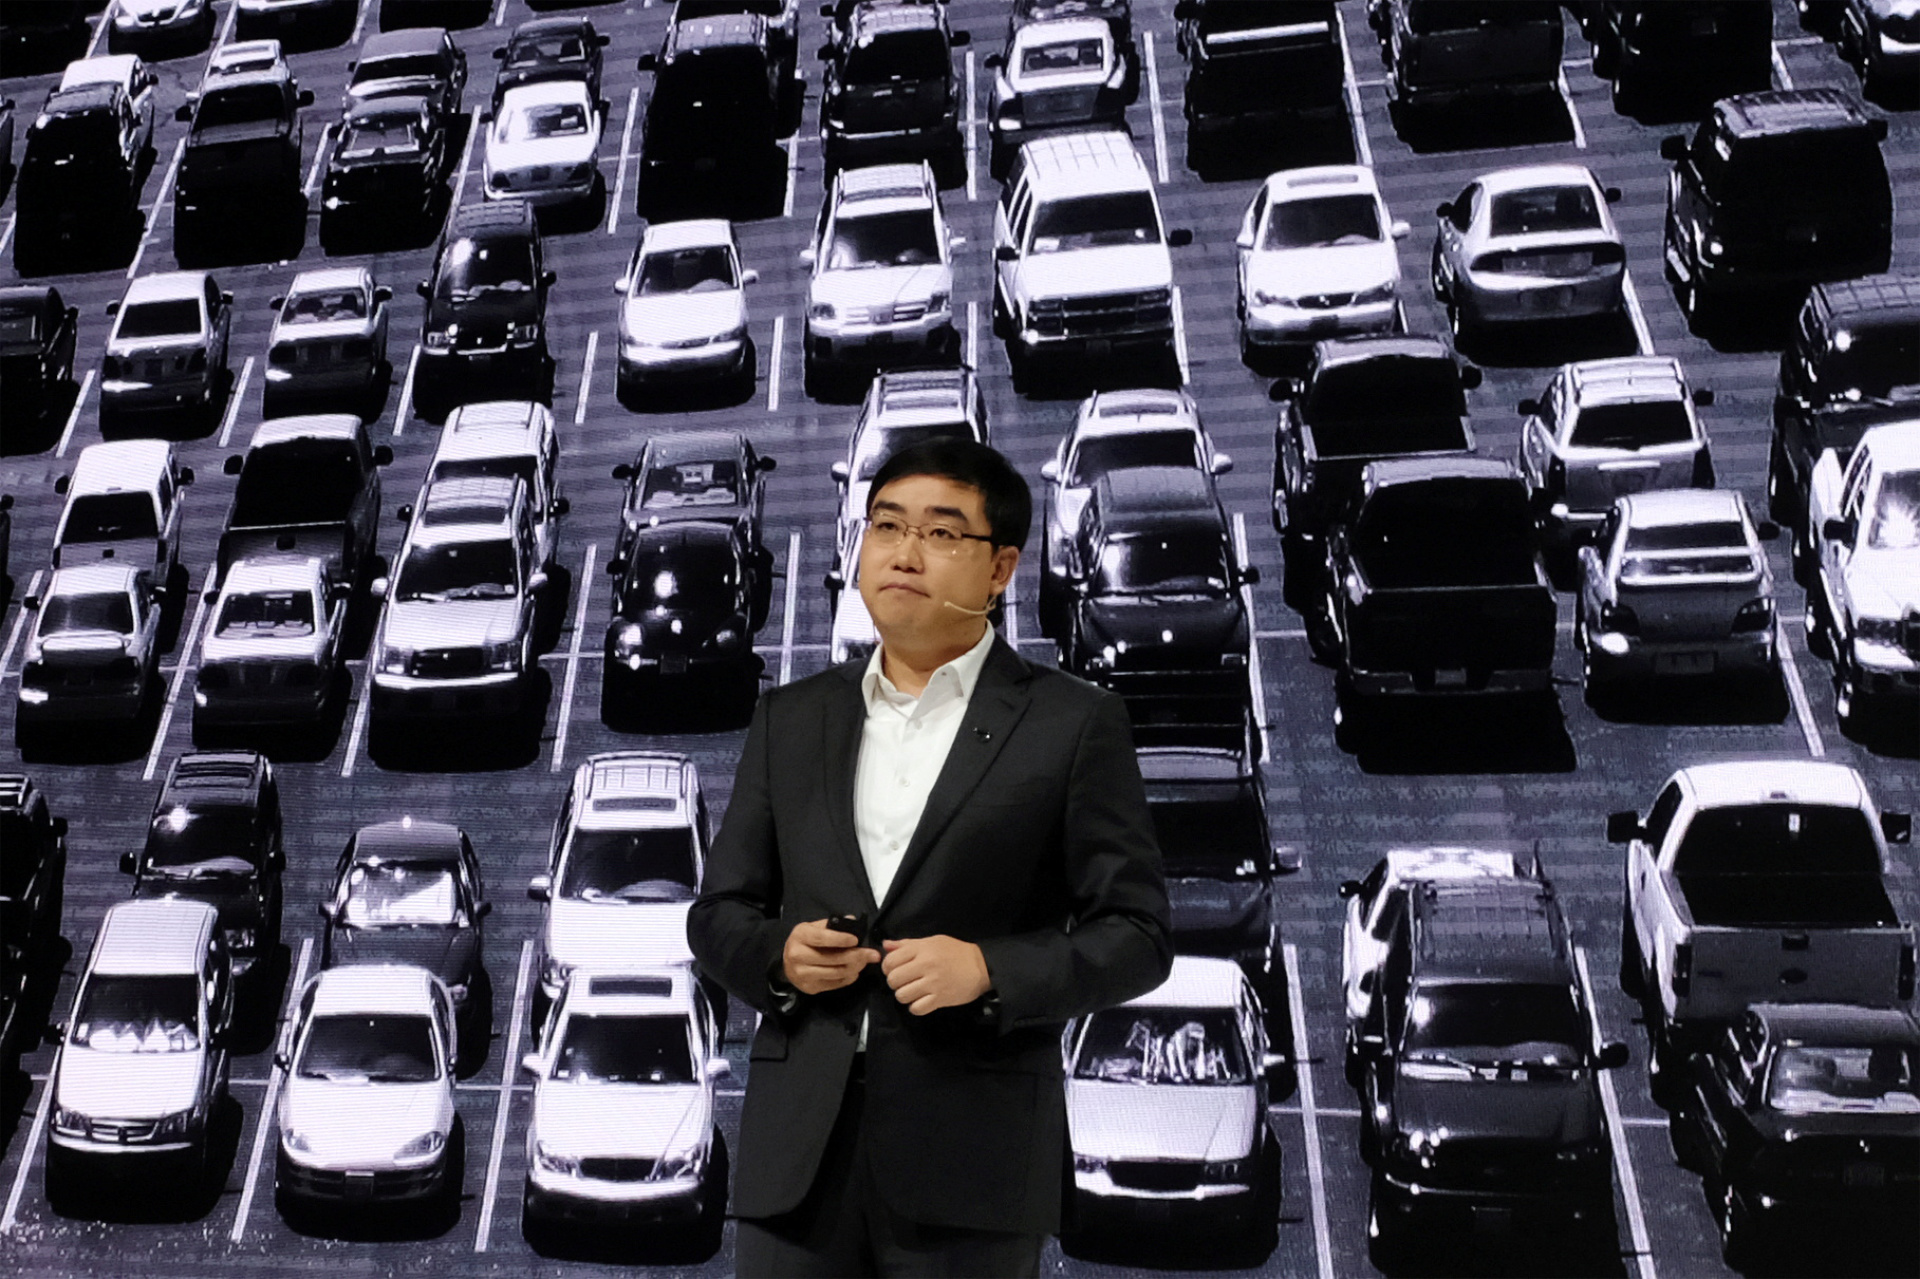 cheng wei, the CEO of Didi Chuxing, in front of an image of cars in a parking lot